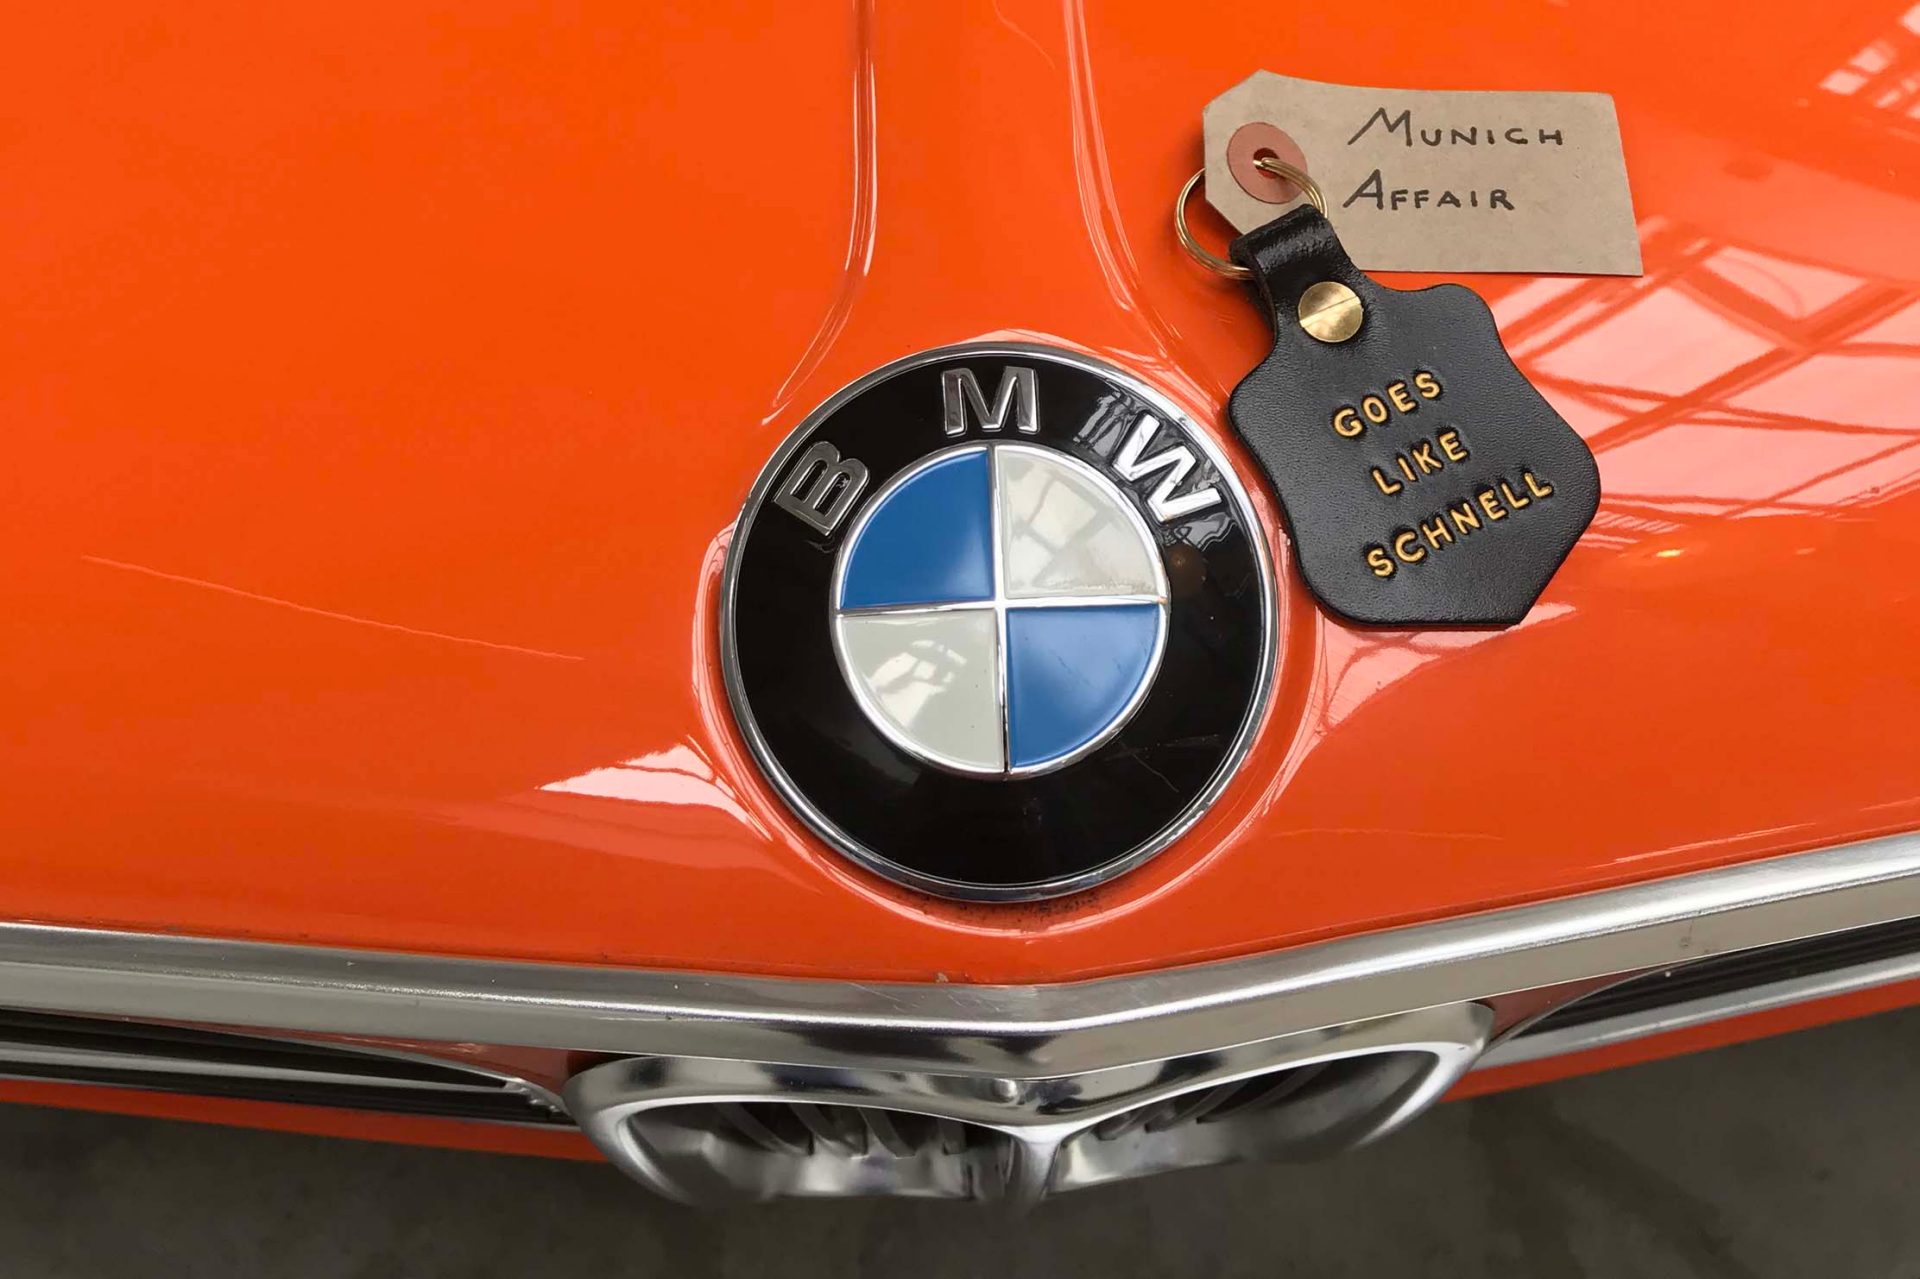 Arrivato a Monaco (arriving in Munich). From now on, this unique fob will adorn the keys to our BMW 2002 tii.